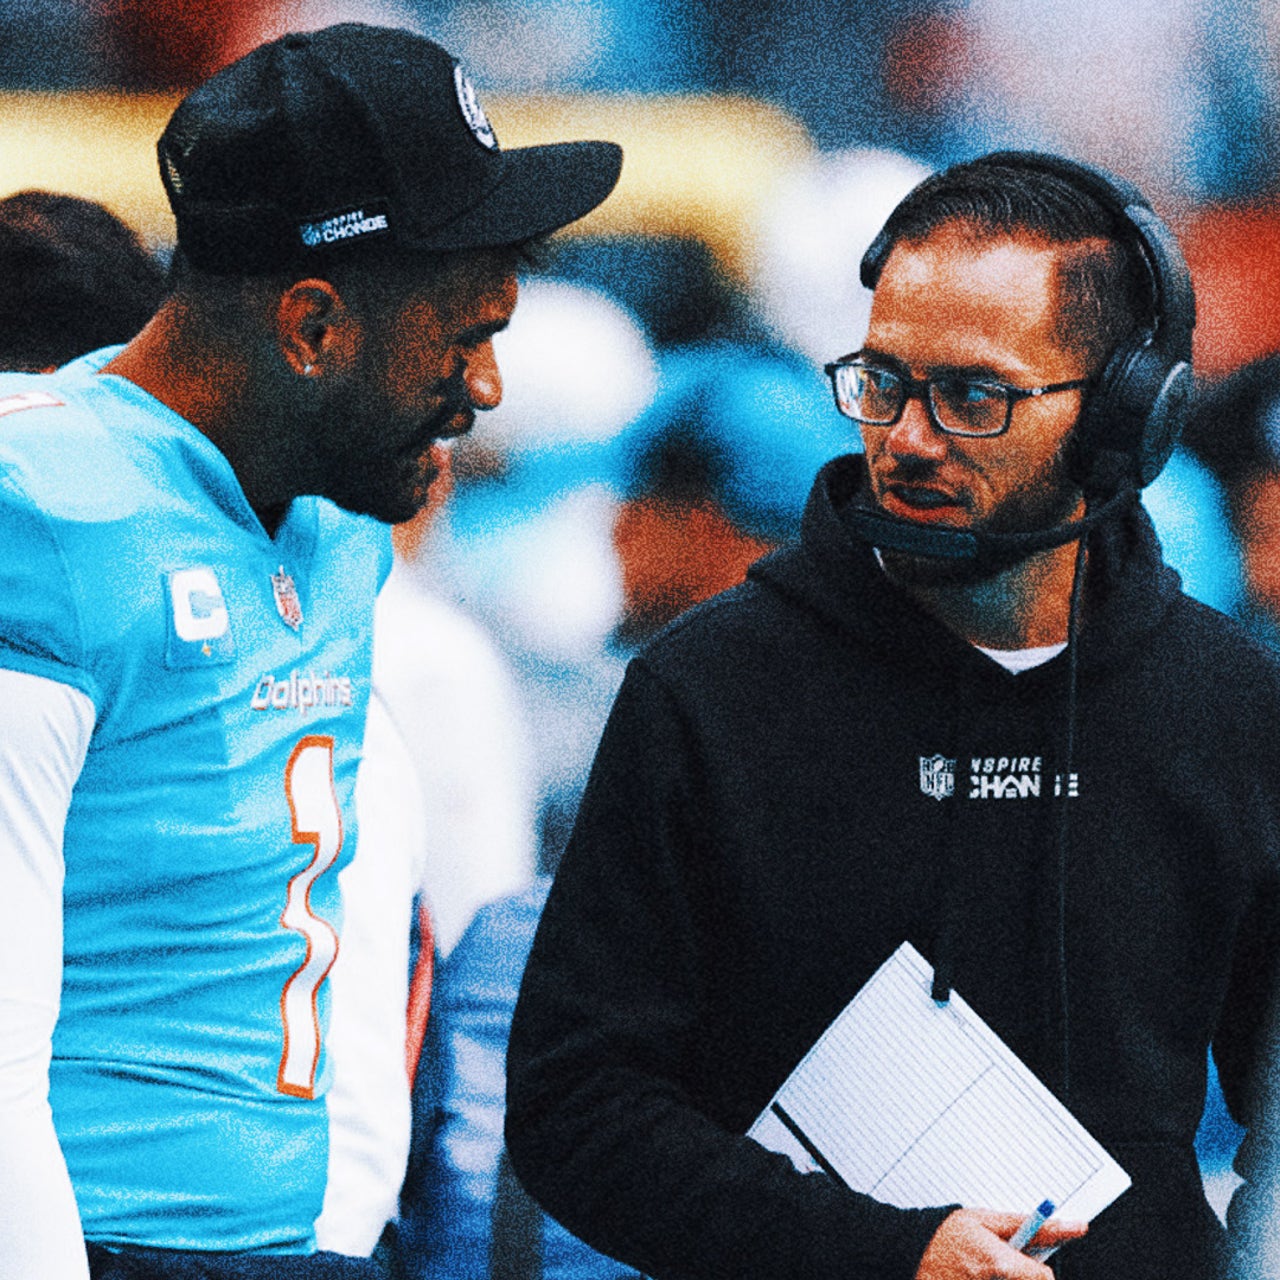 Miami Dolphins 2022 Offseason Preview: Pending free agents, team needs,  draft picks, and more